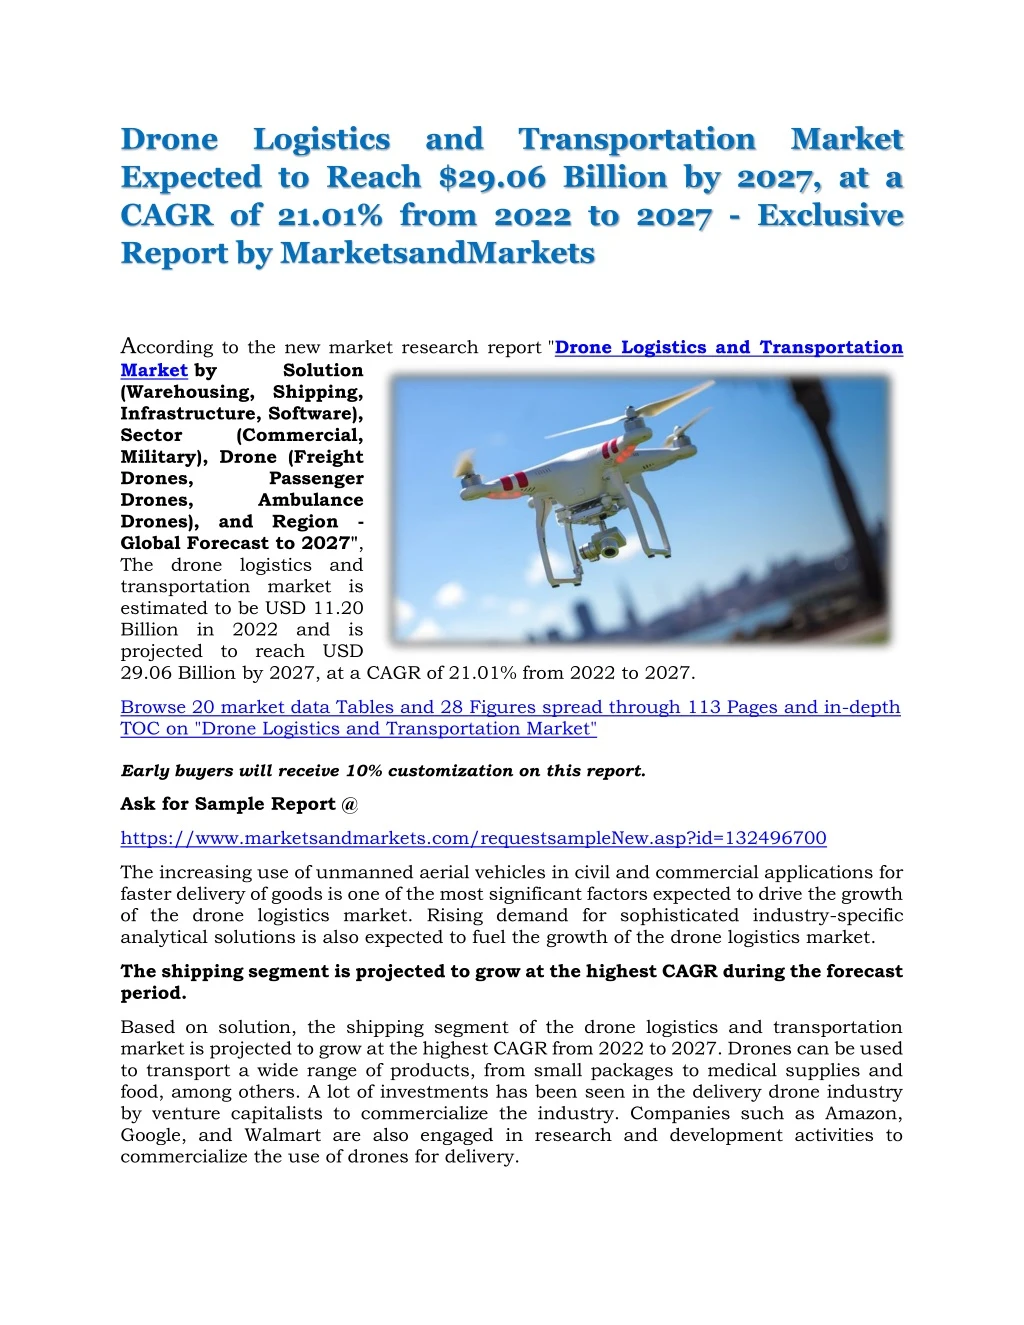 drone expected to reach 29 06 billion by 2027